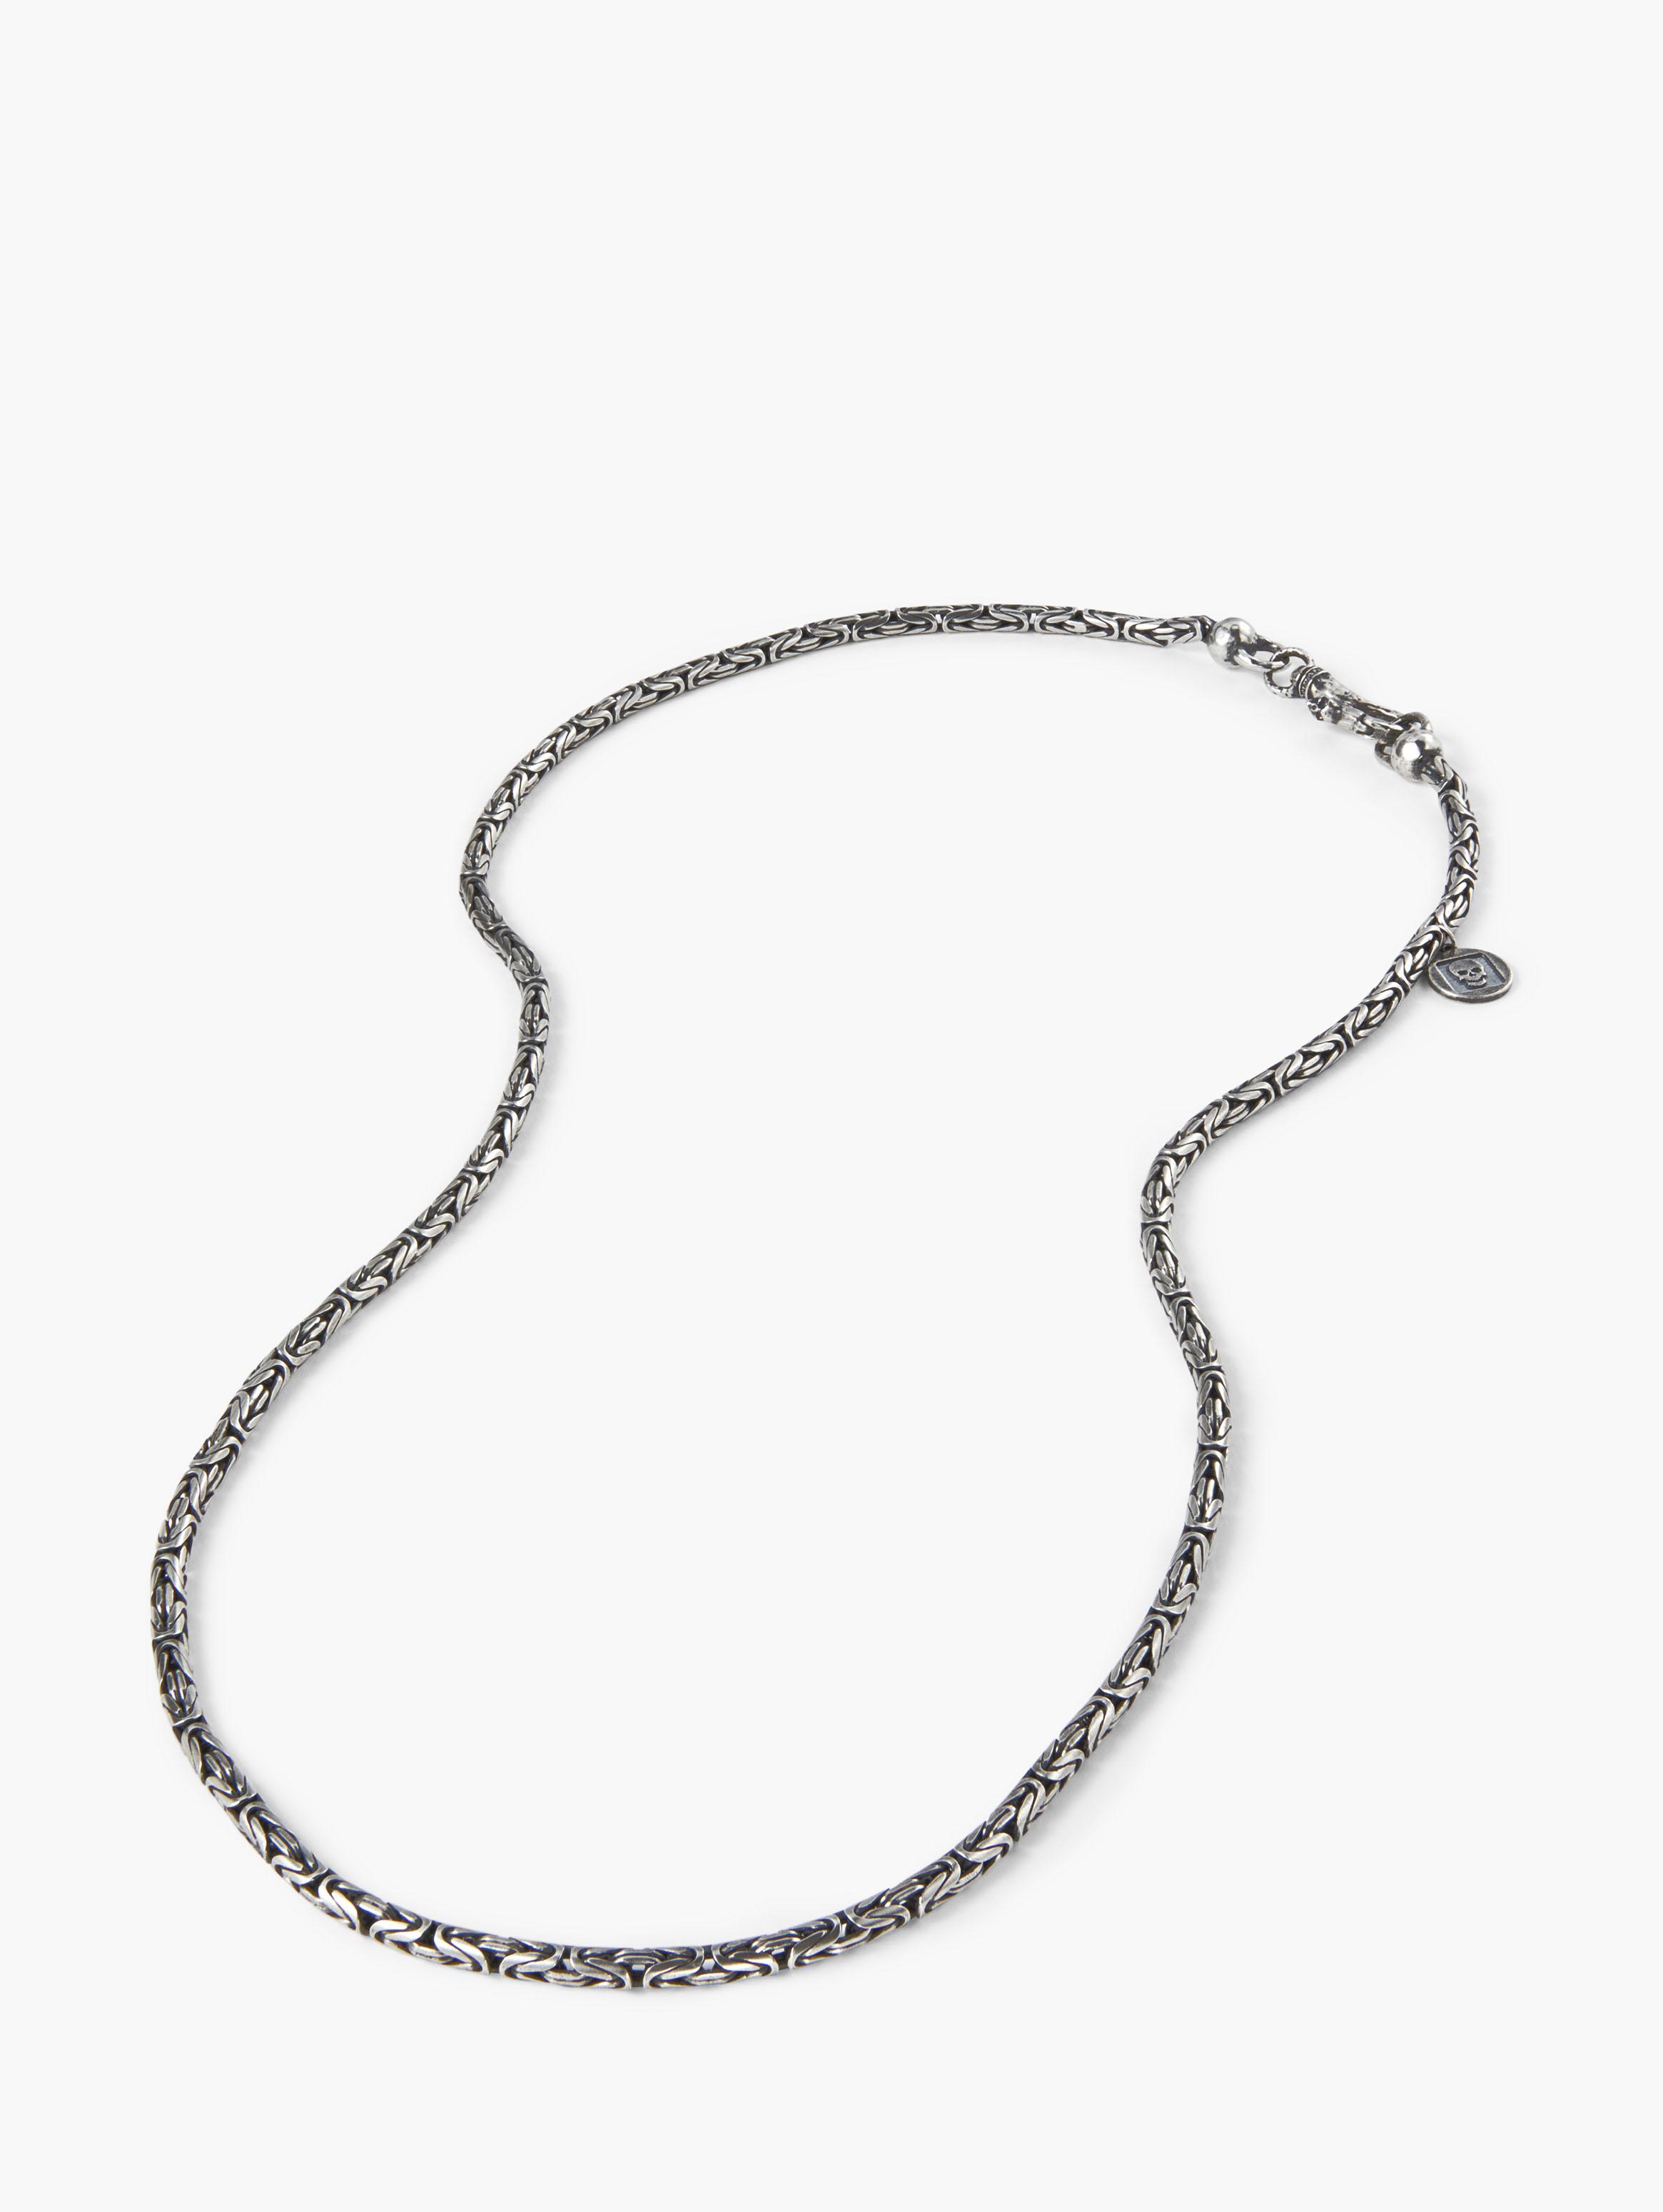 John Varvatos OVAL DOG TAG Chain Necklace for Men in Hammered Silver